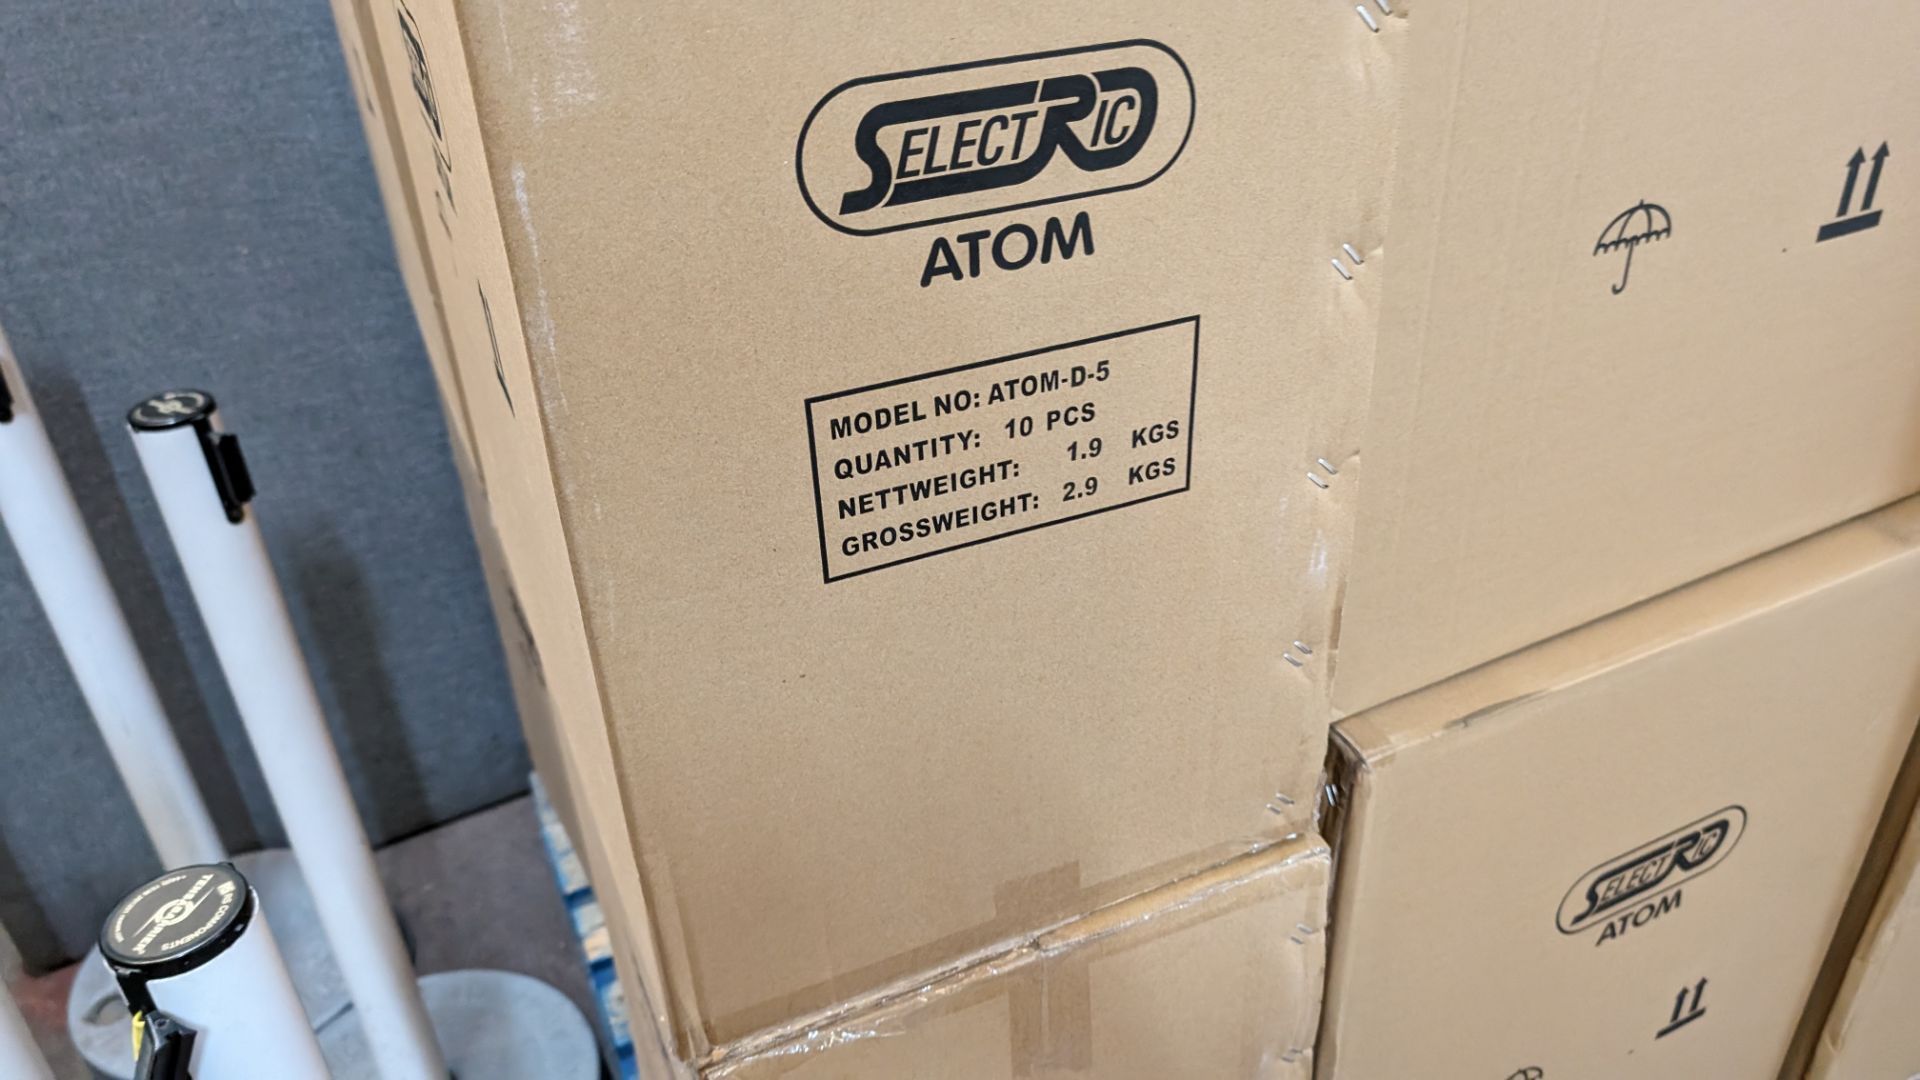 30 boxes of Atom D5 bezels for use with circular bulkhead lamps. There are 10 bezels per box - Bild 3 aus 6